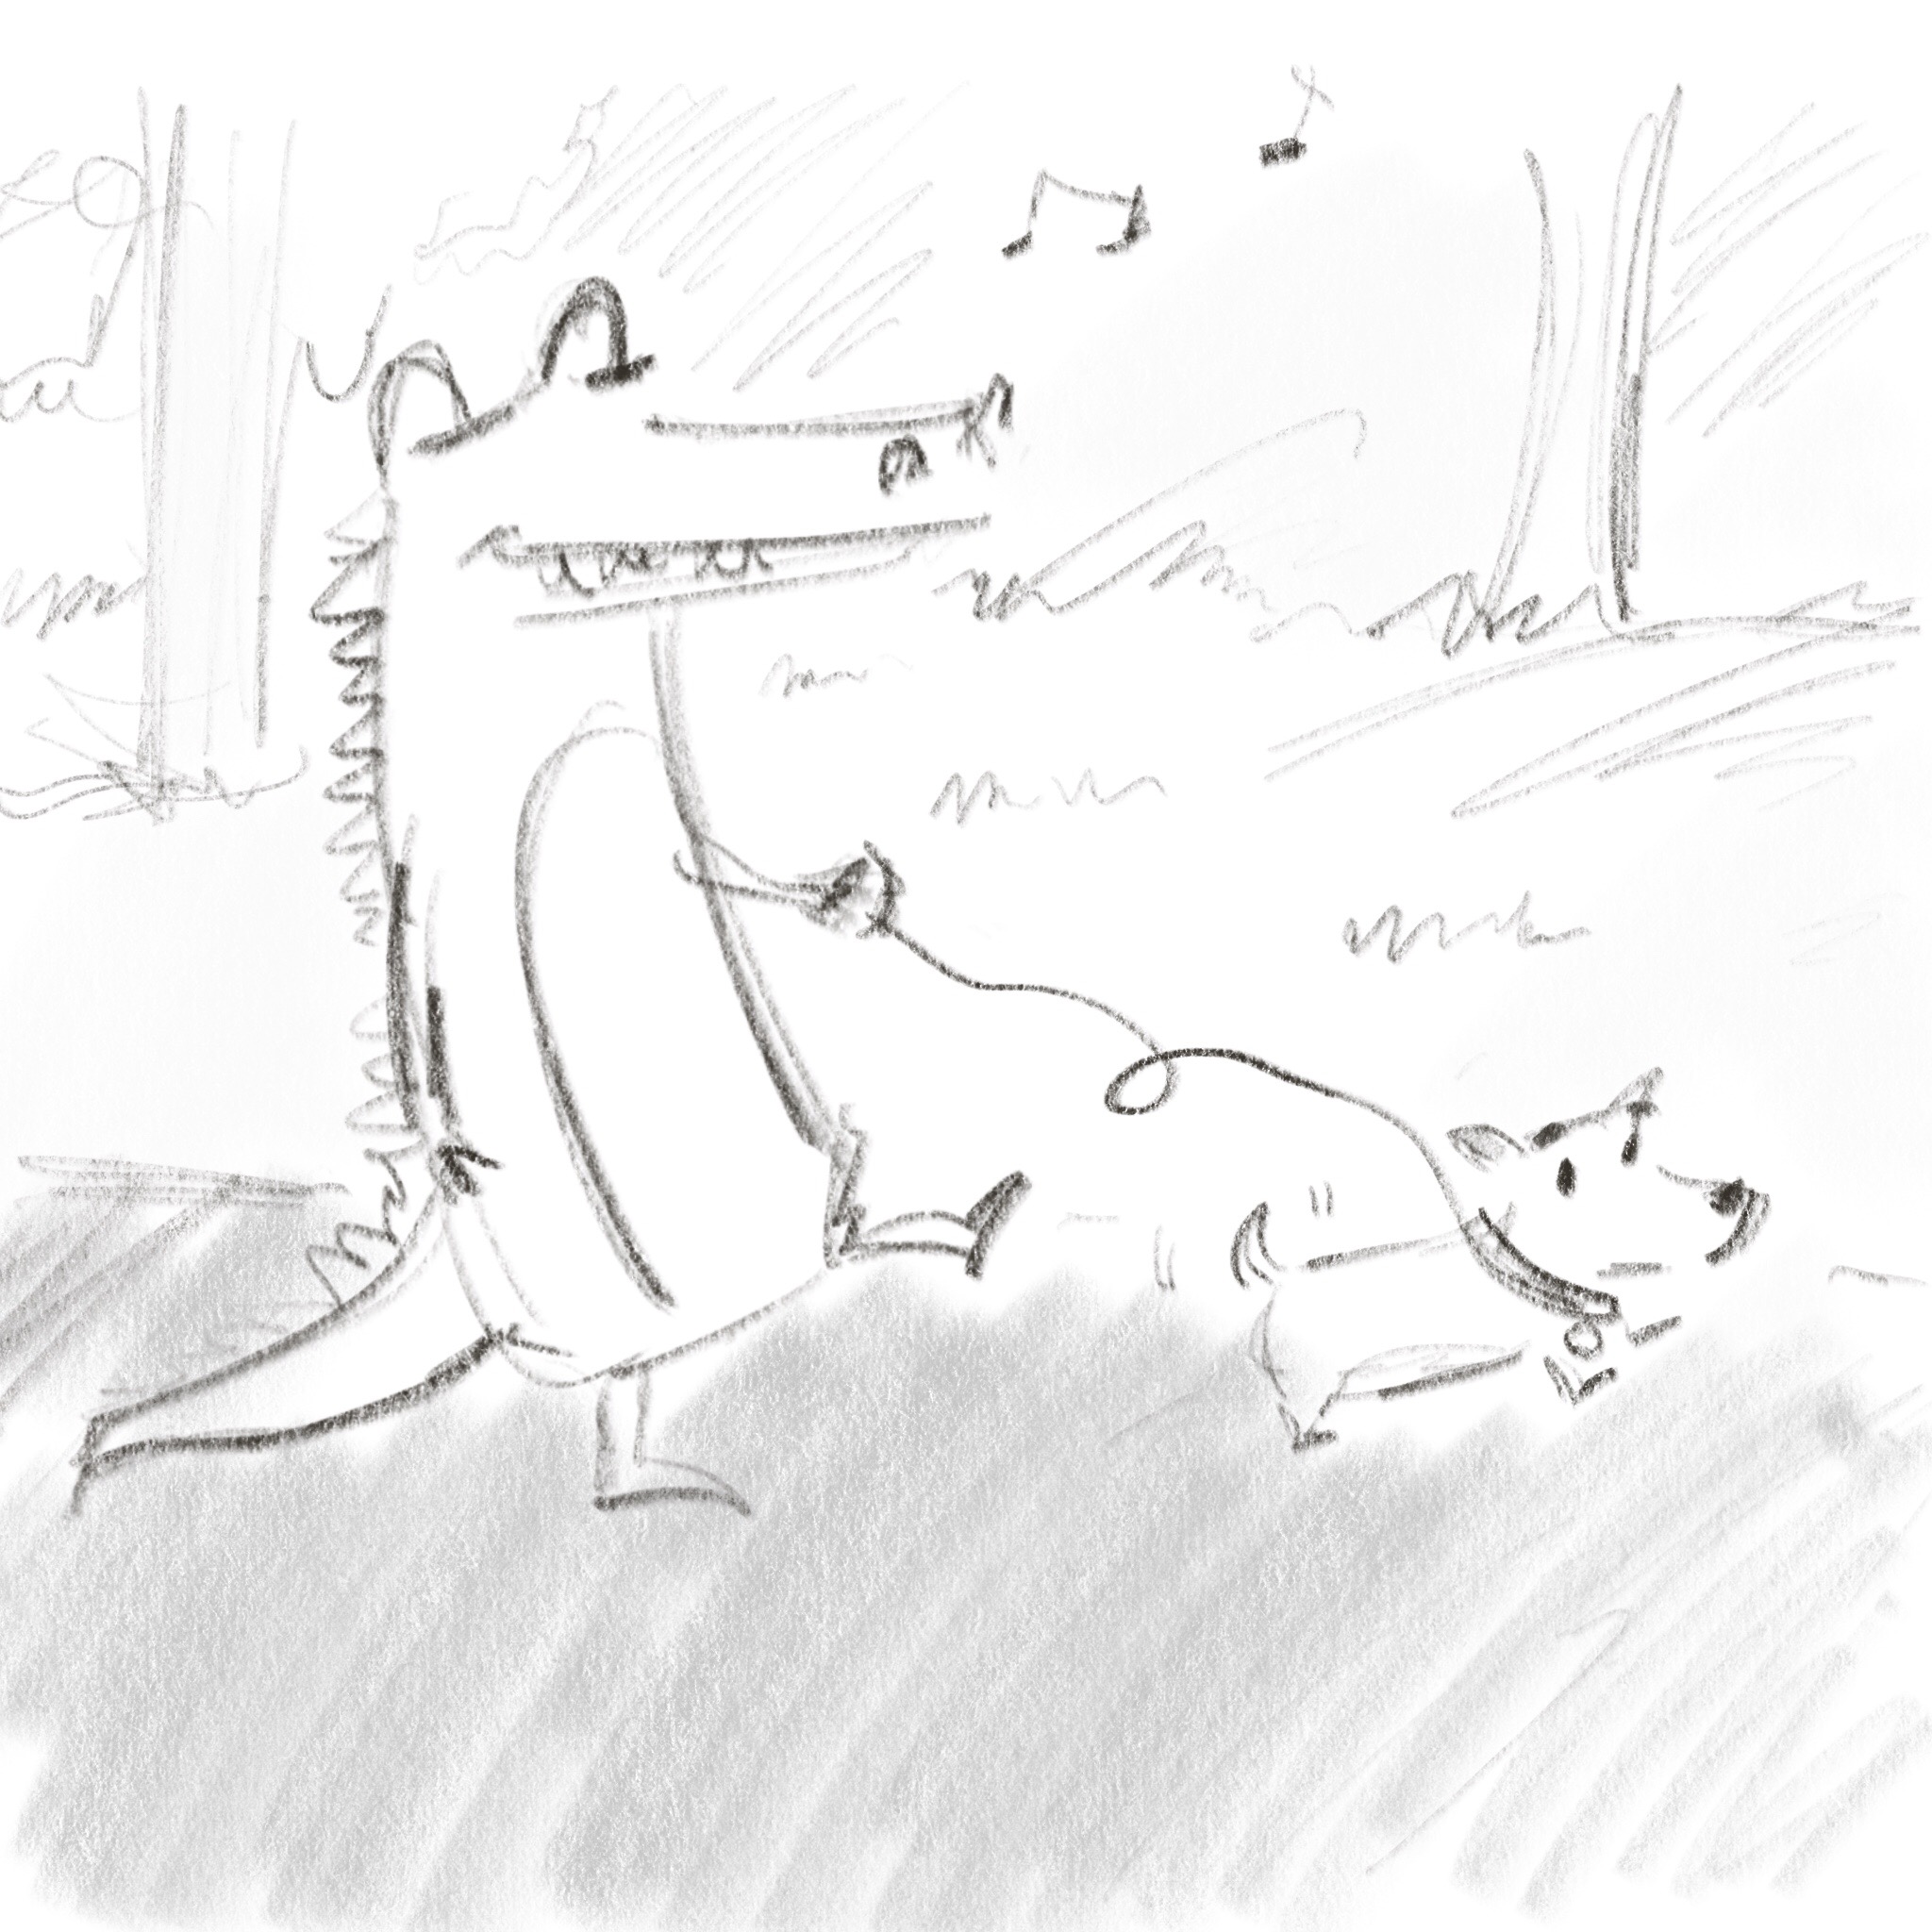 Frame four drawing of an alligator whistling walking a dog